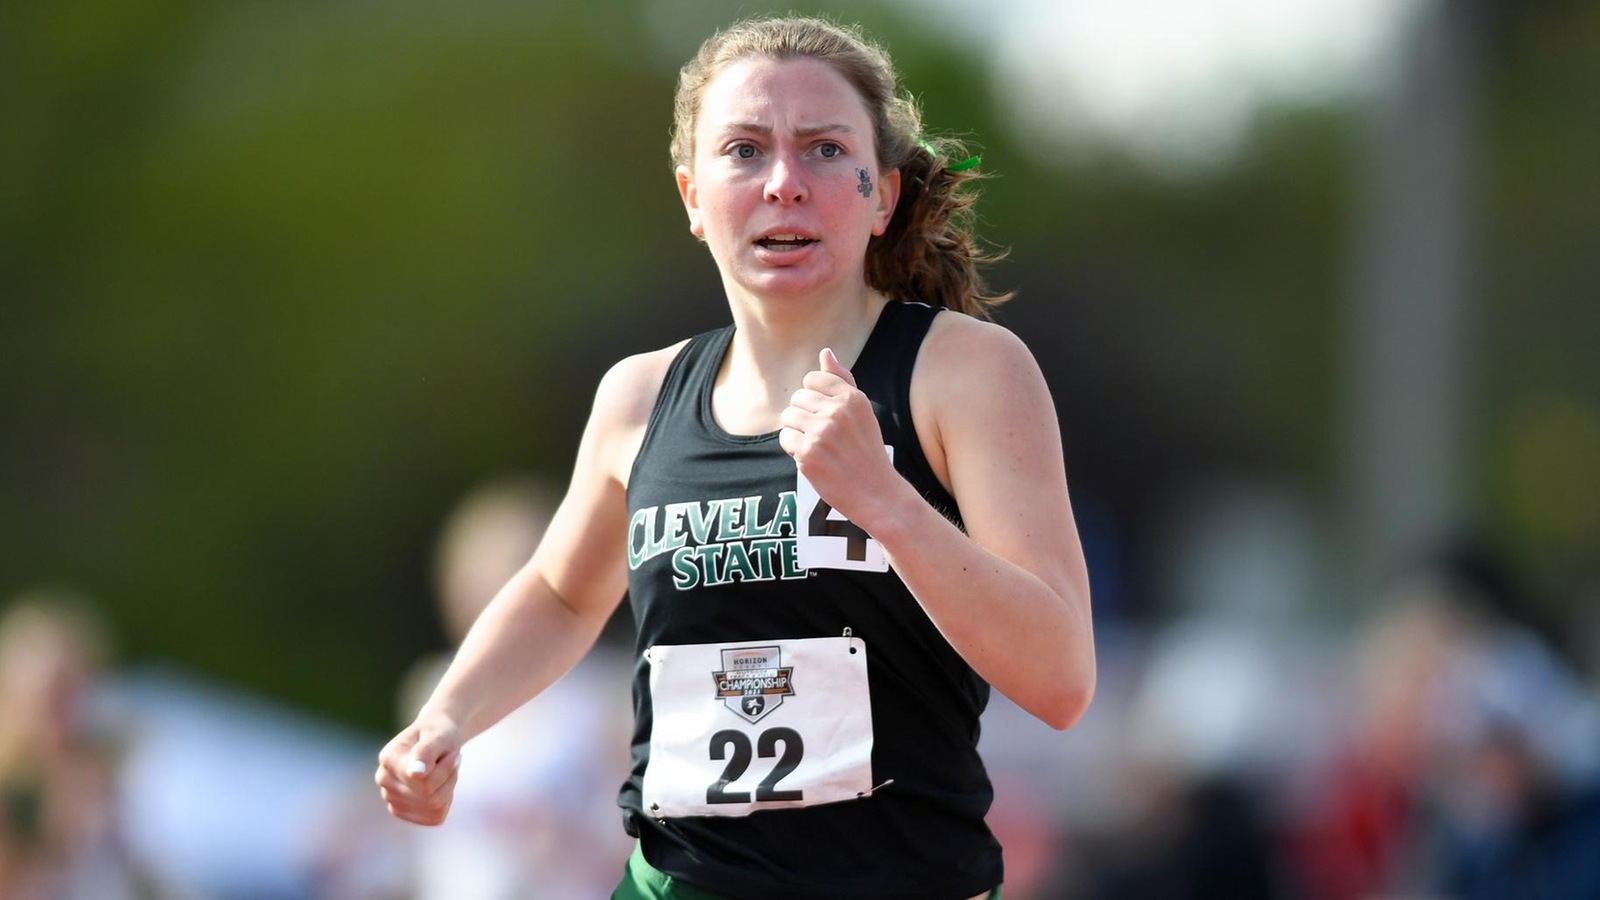 Smith Wins 400 Open Race At Alan Connie Shamrock Invitational